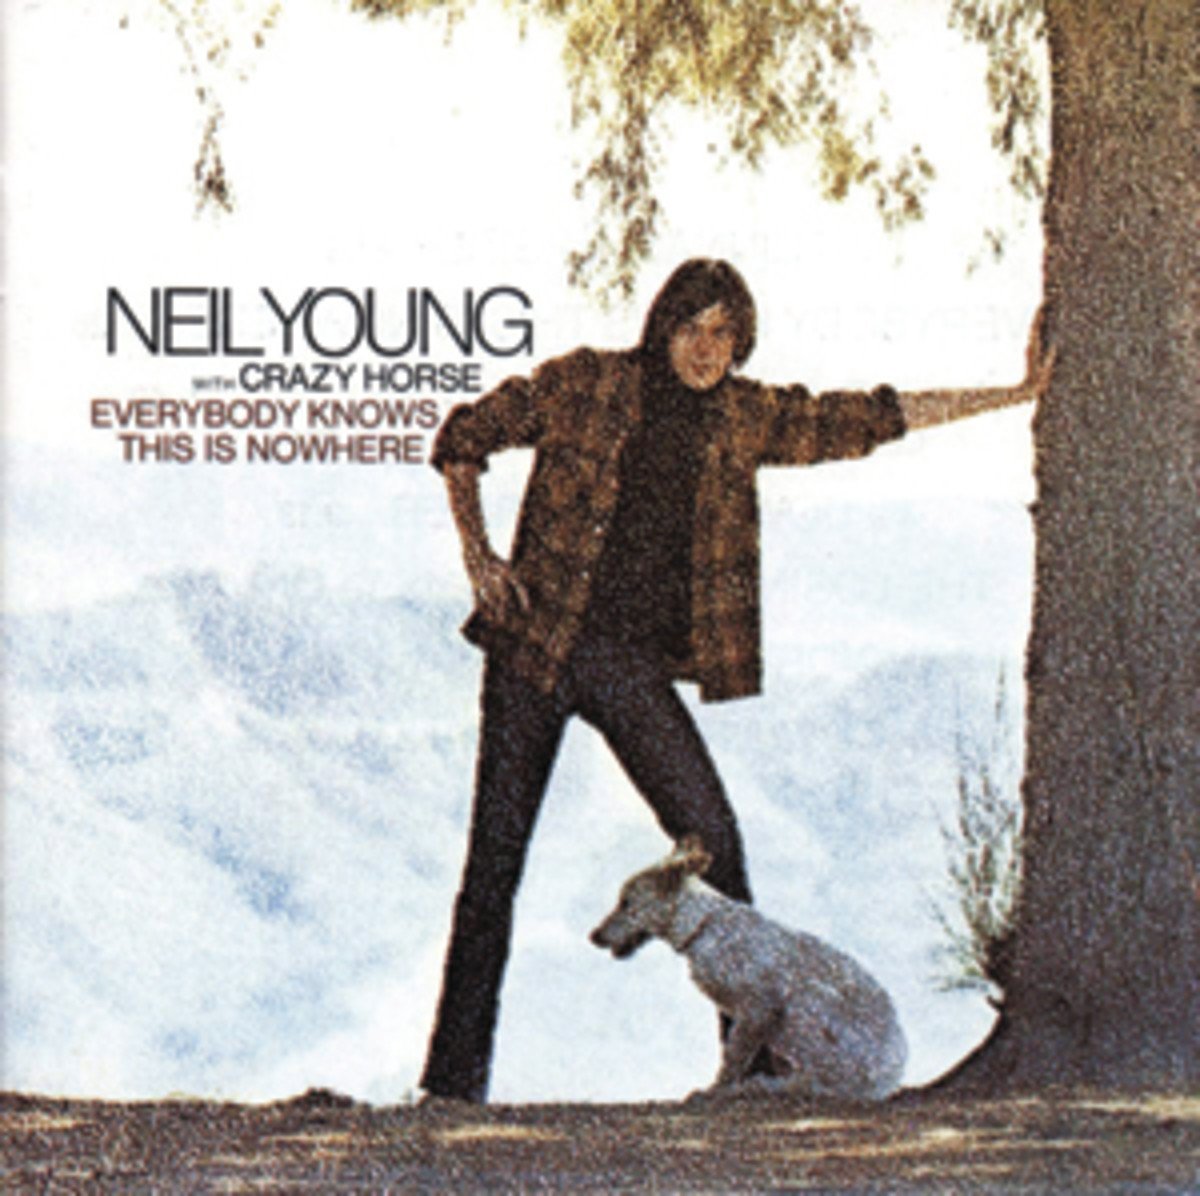 Neil Young with Crazy Horse, Everybody Knows This is Nowhere 